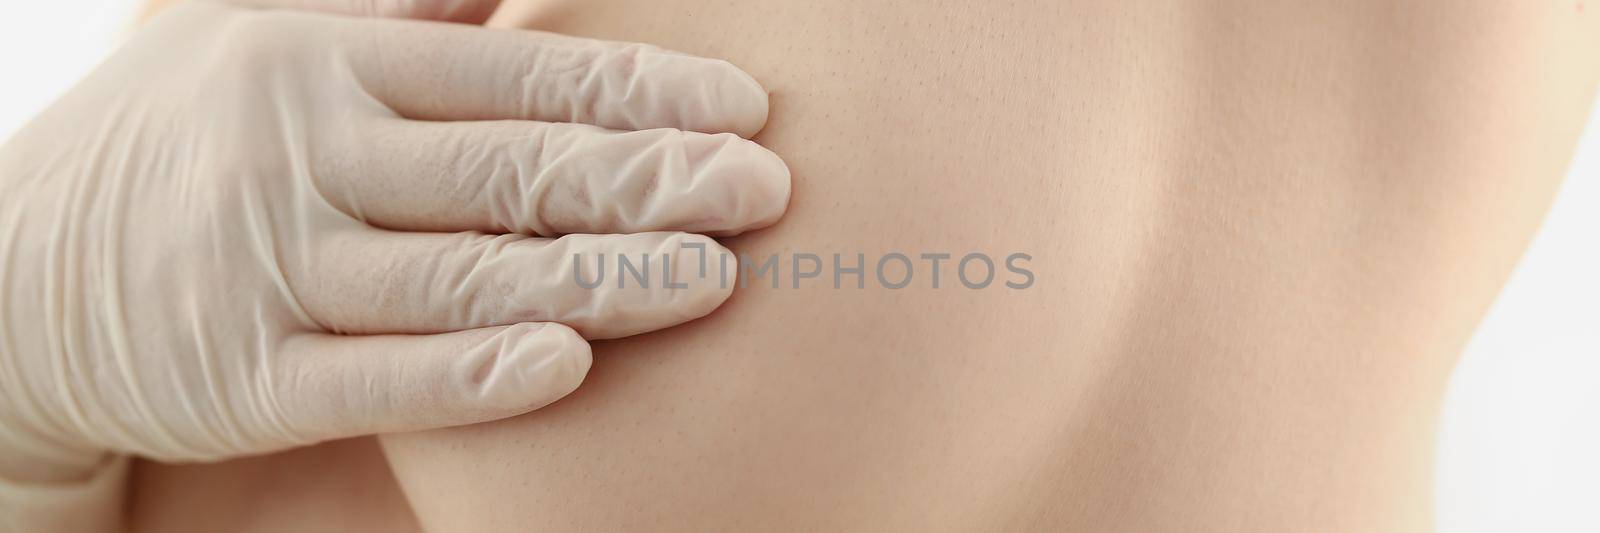 Close-up of woman preparing for breast operation, topless female cover boob with hand in glove. Desire for breast augmentation, surgery made in clinic. Beauty, plastic, cosmetic surgery concept